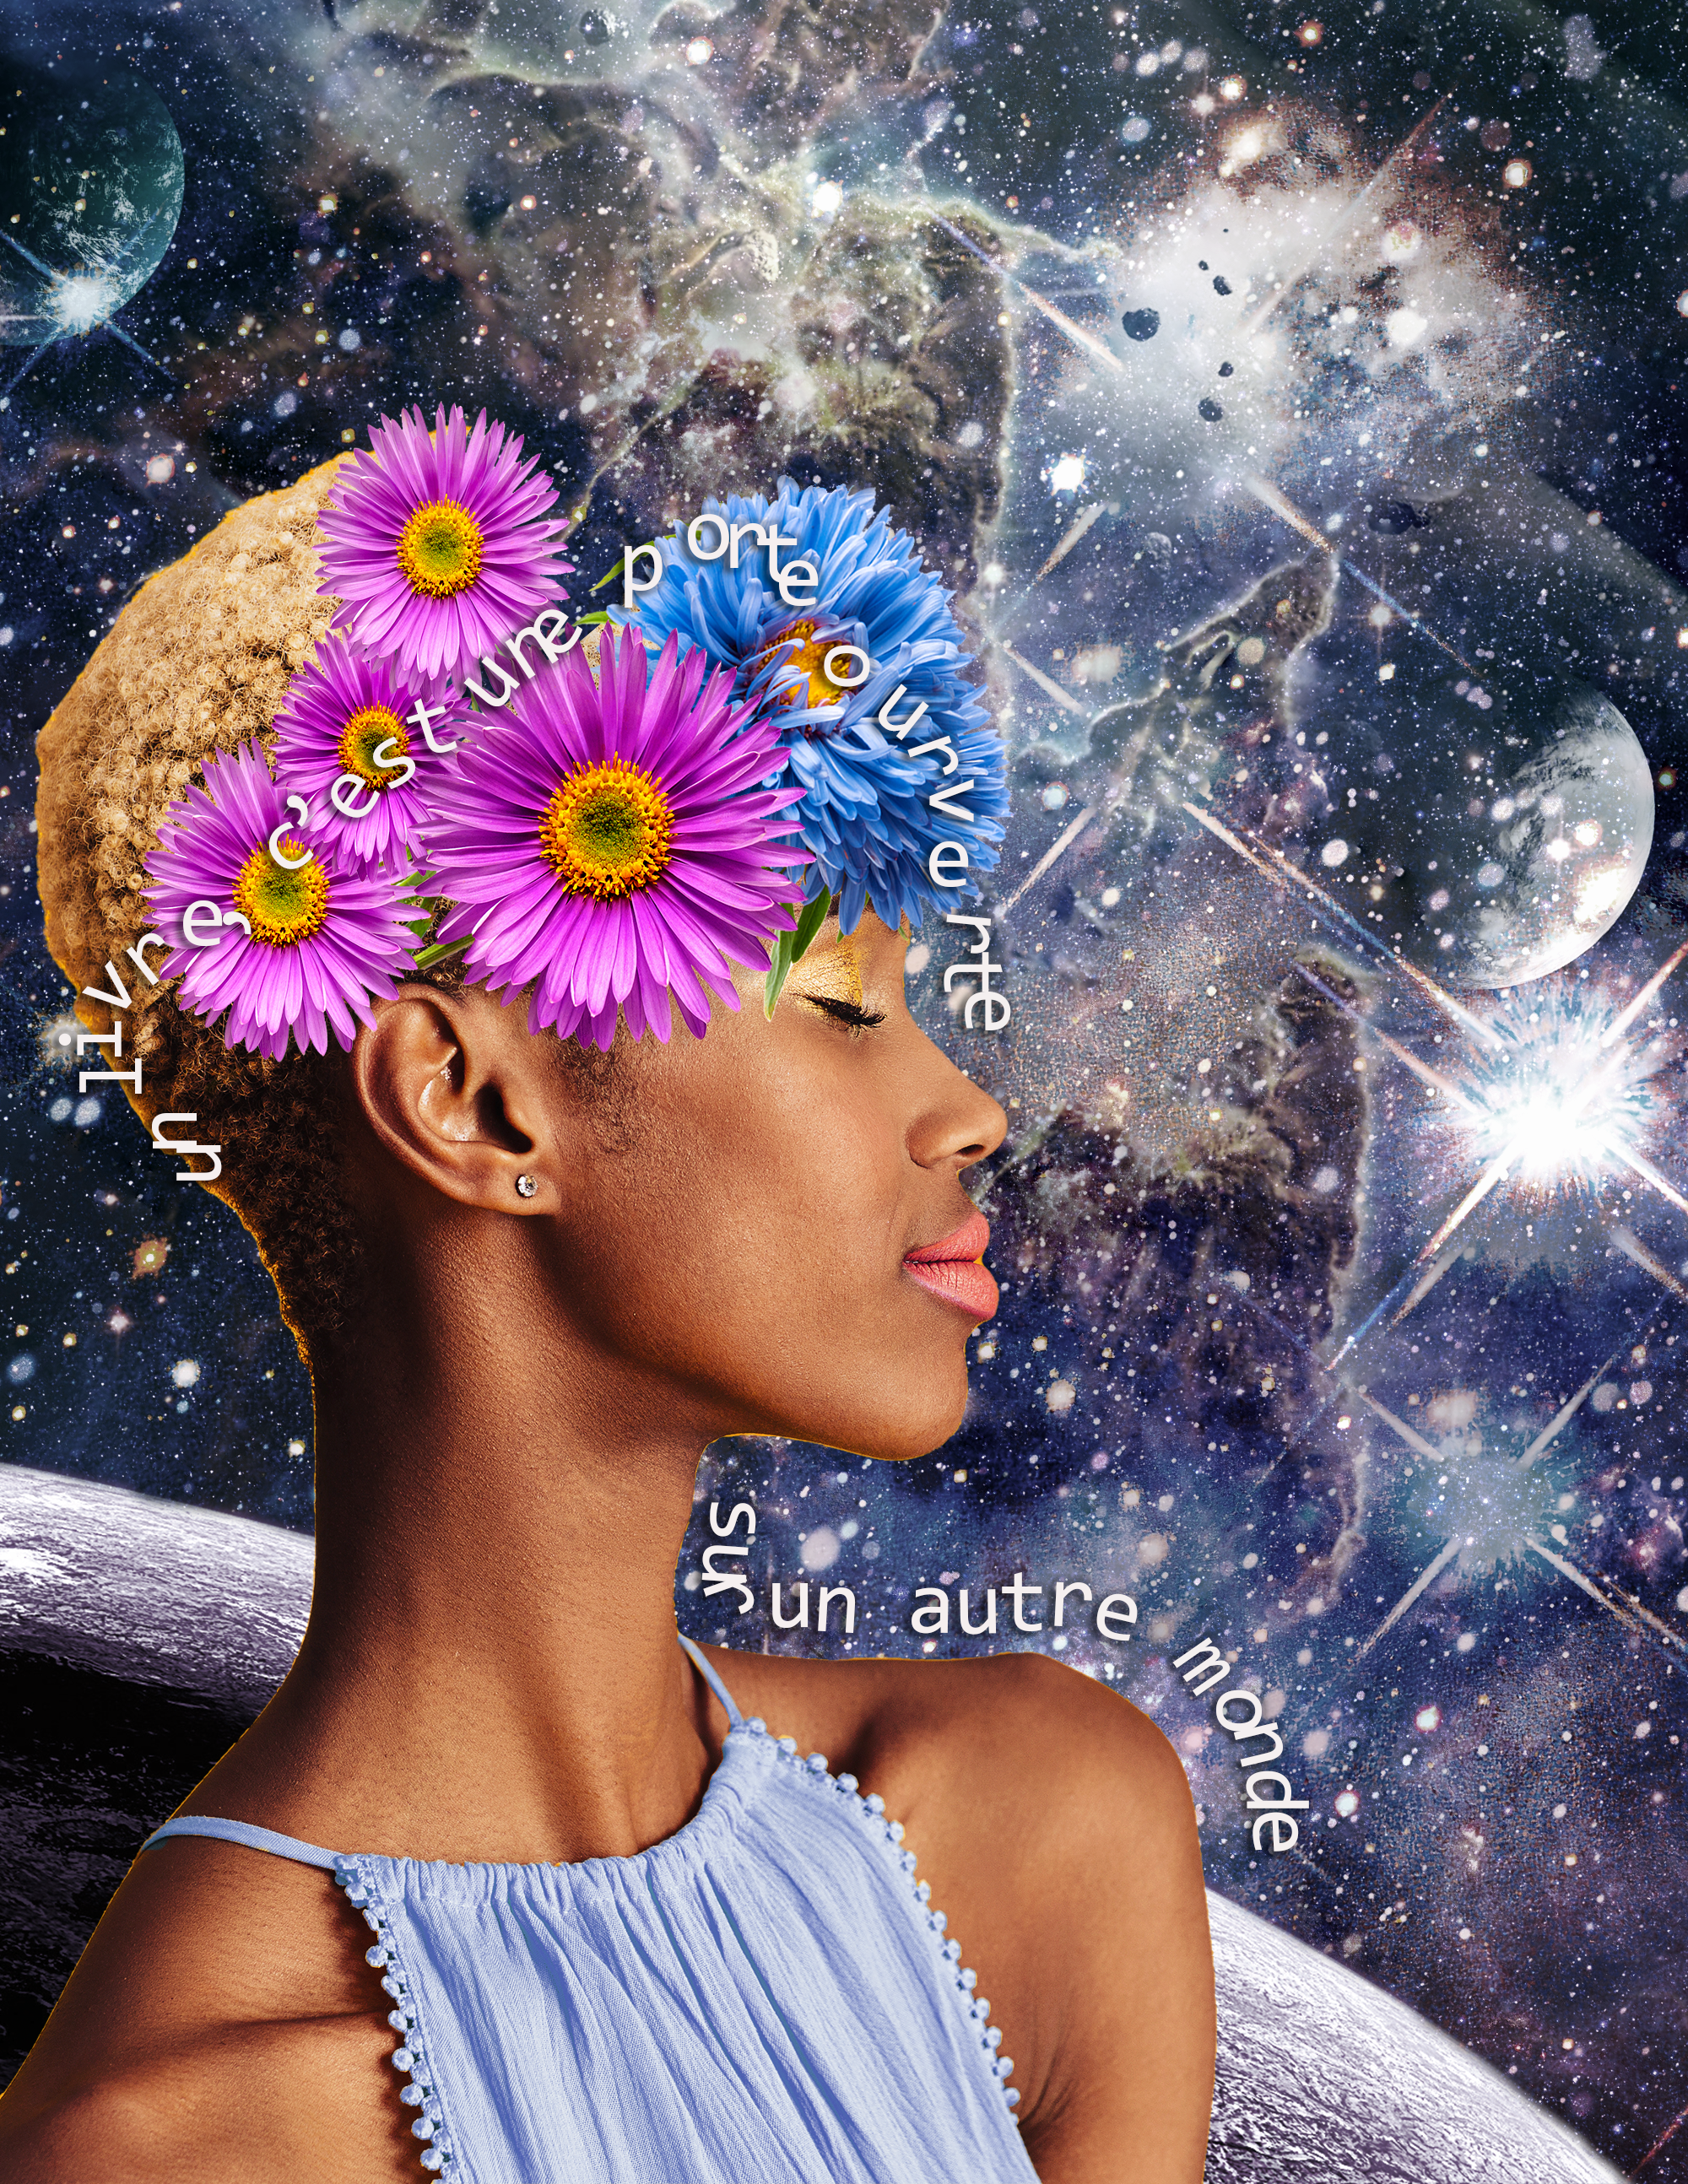 A woman smiles, with flowers emerging from her head, the cosmos and planets expanding behind her. Books are doors to other worlds stretches in text around her and she looks lost in her imagination.